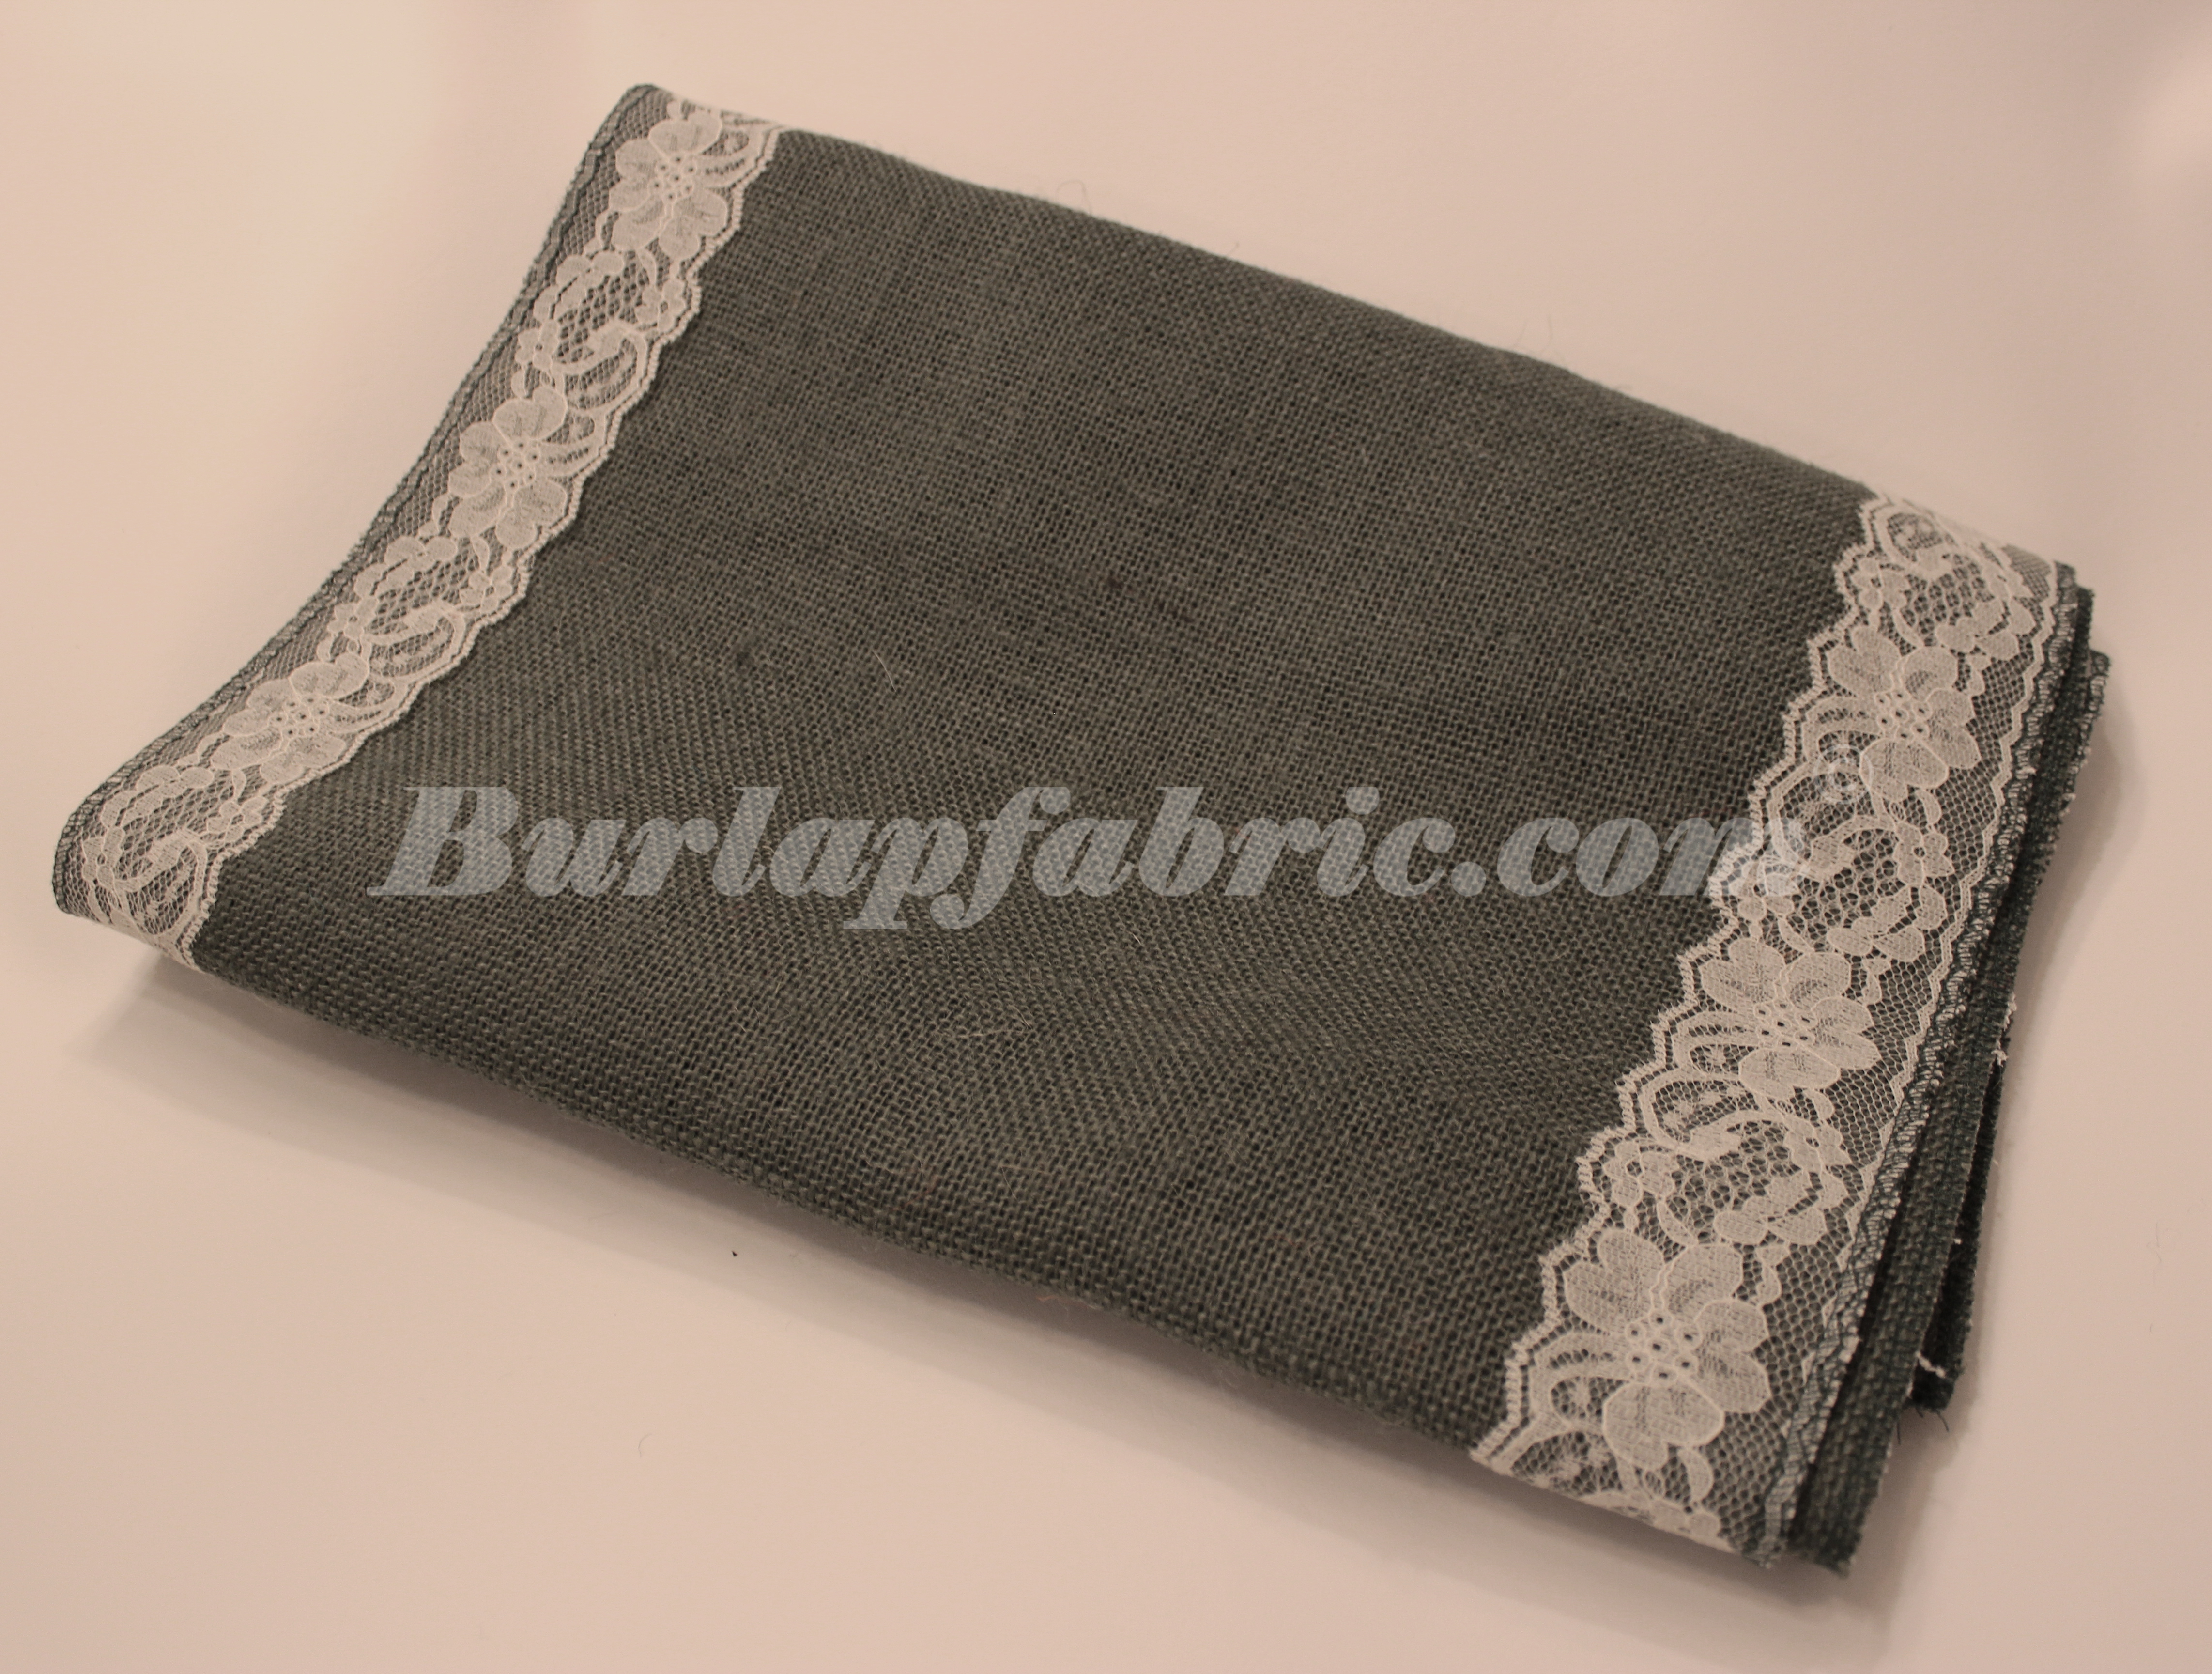 14" Charcoal Grey Burlap Table Runner with 2" Ivory Lace Borders